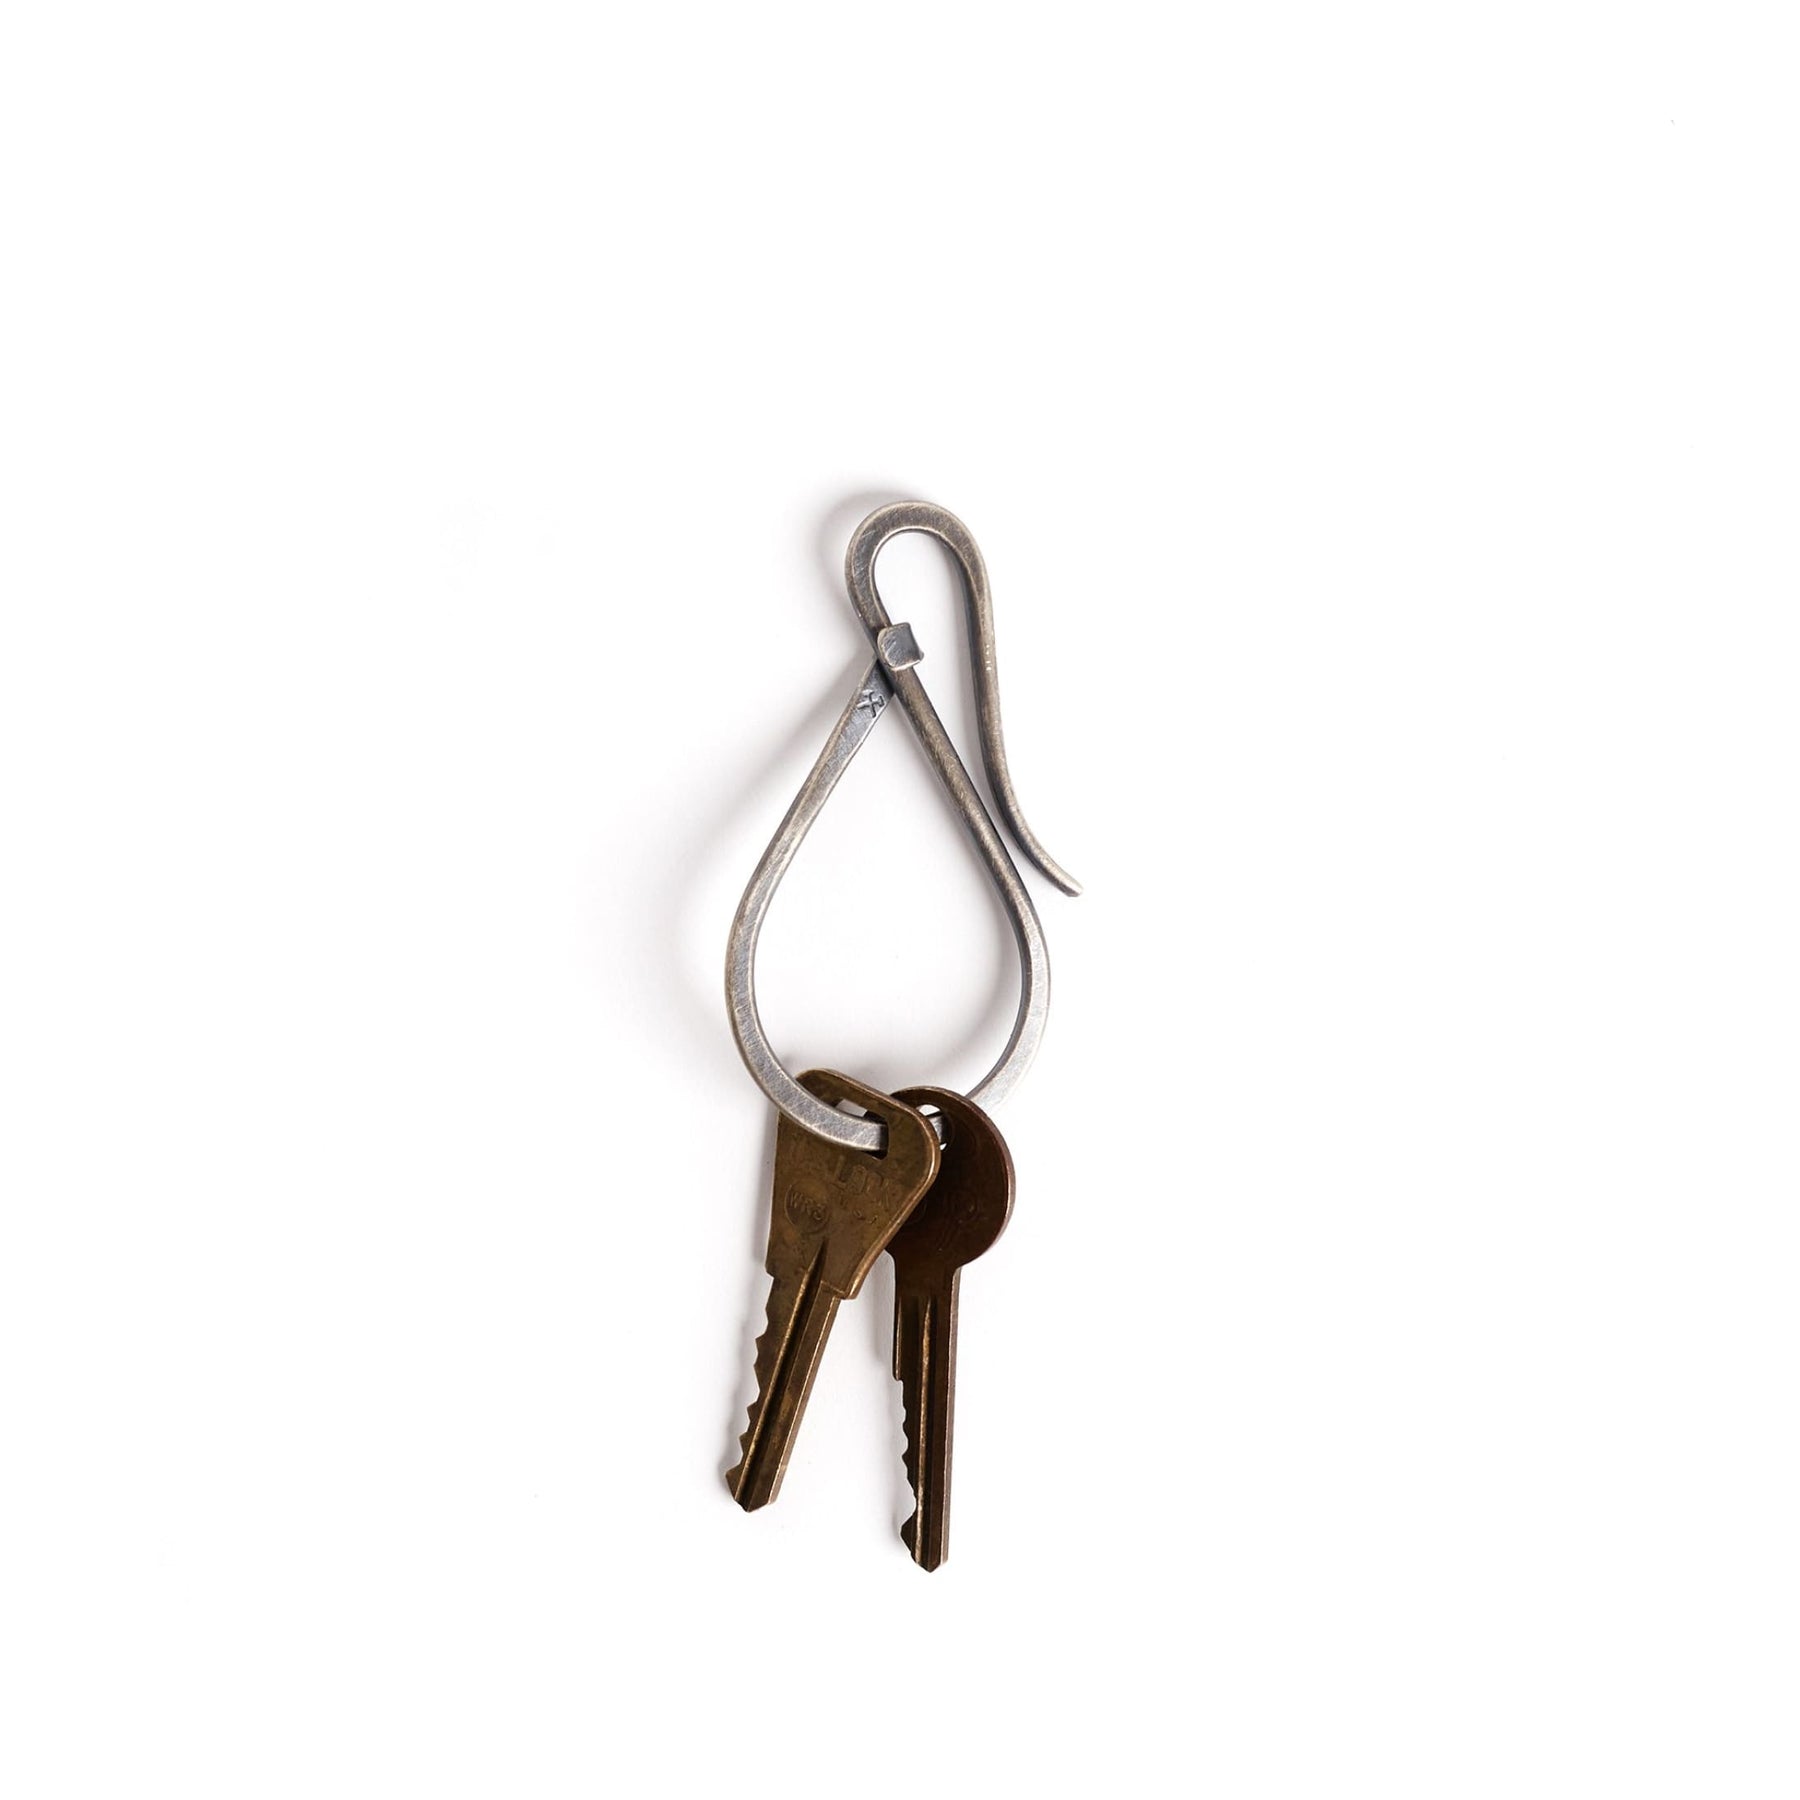 BULK 20 Key Ring Holders Silver Tone With Extender Chain F553 